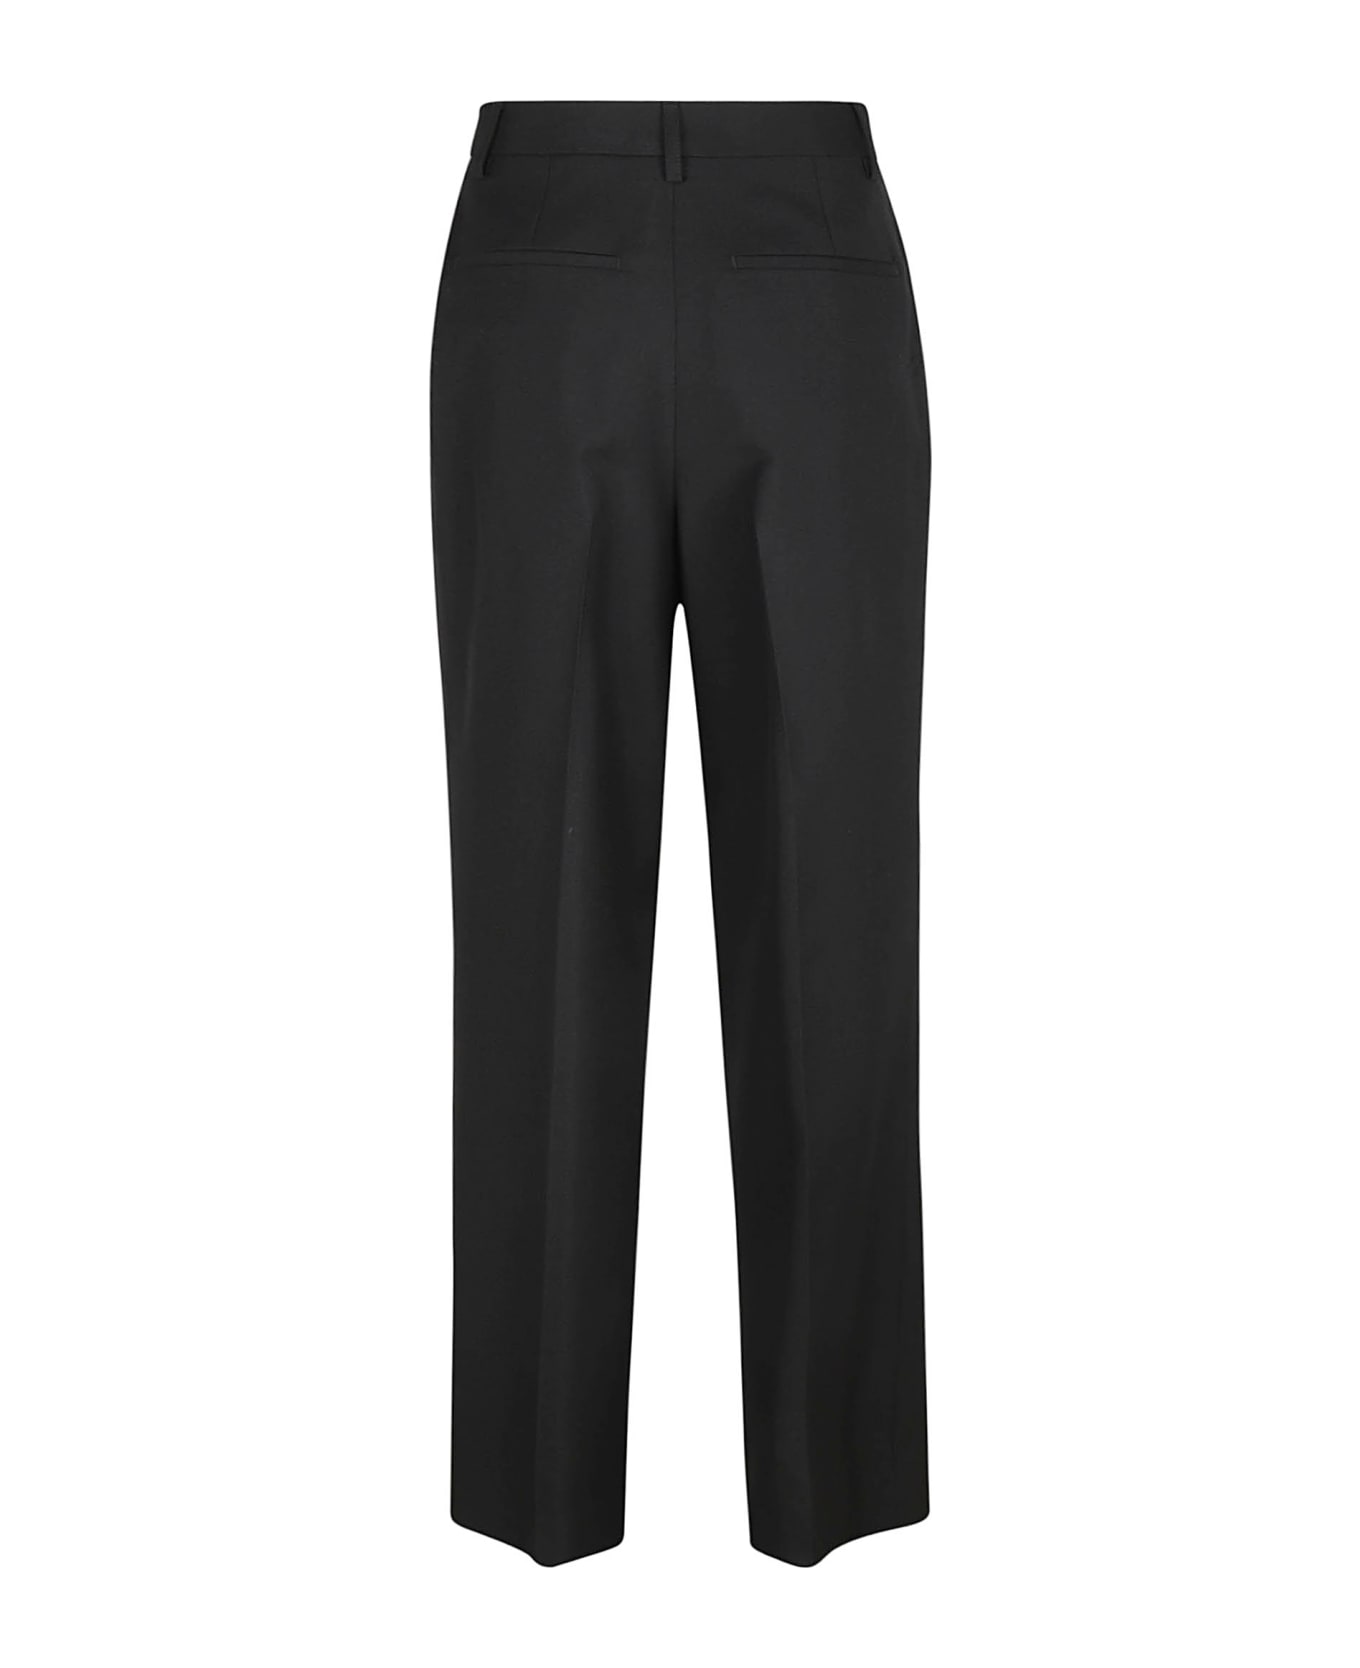 Burberry Madge Trousers - BLACK